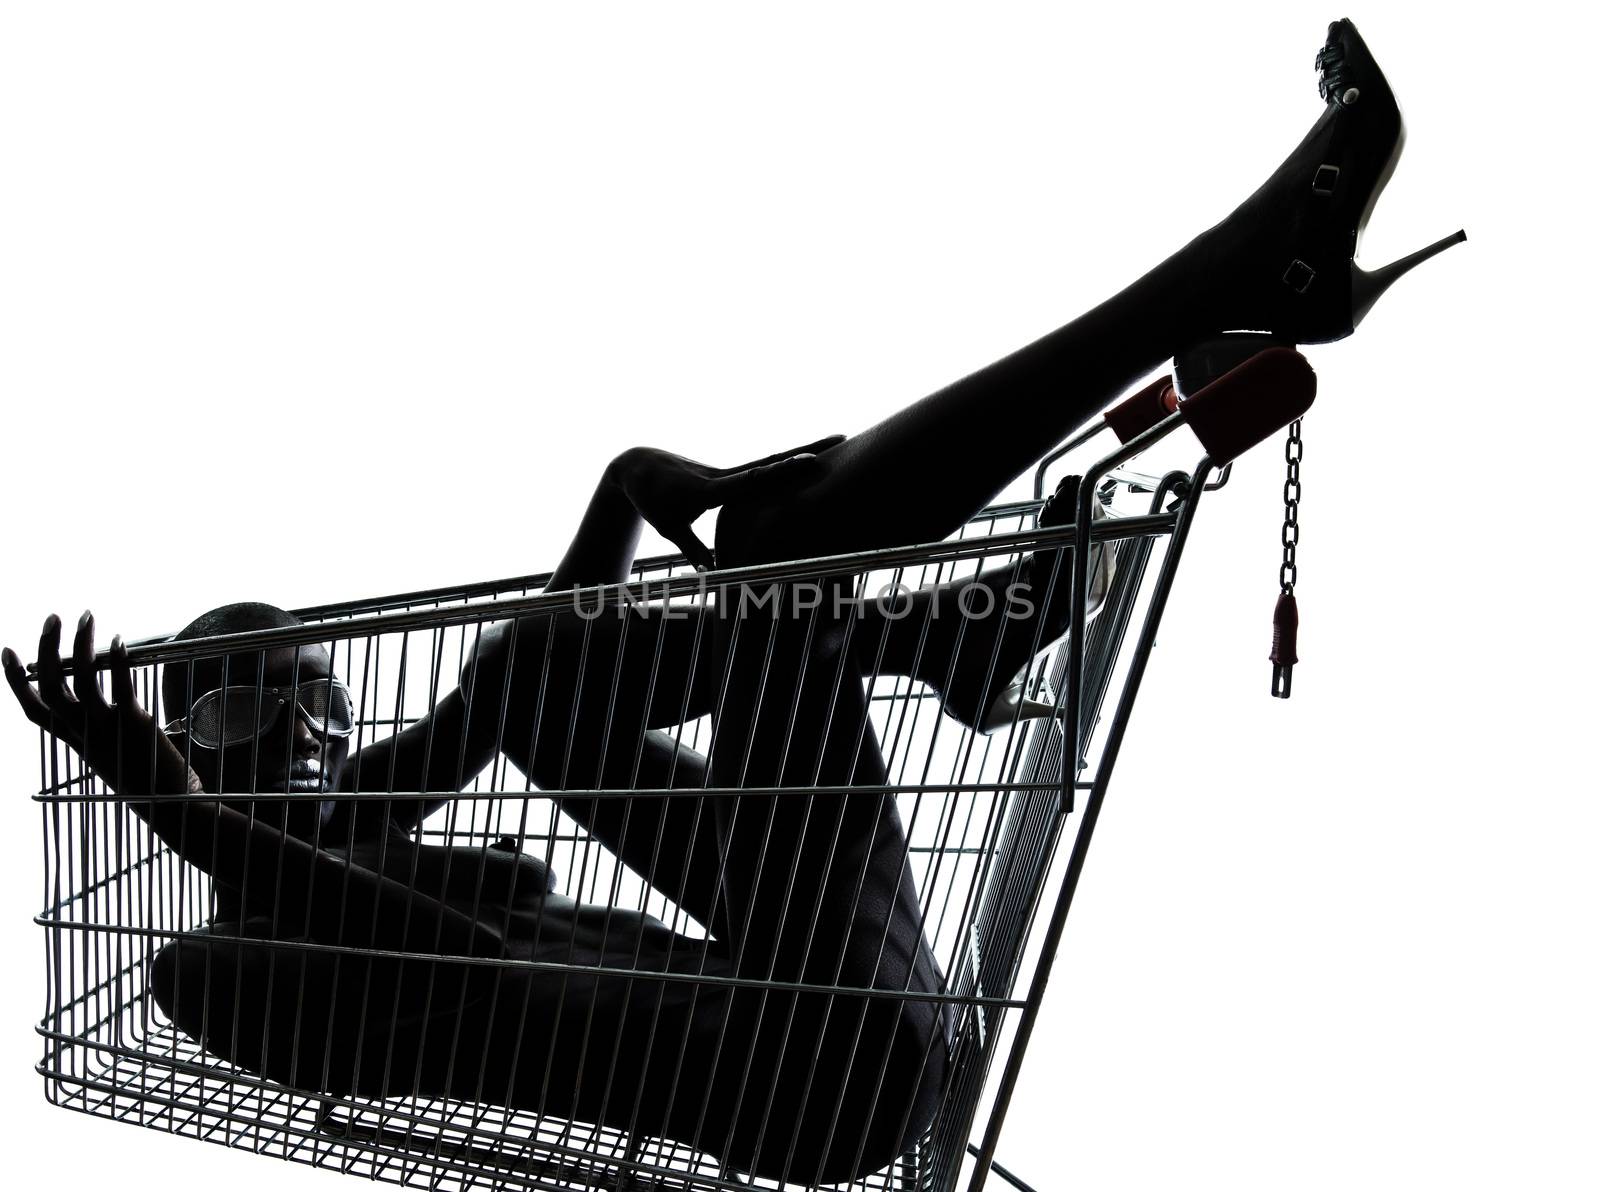 woman naked in a caddy shopping cart silhouette by PIXSTILL